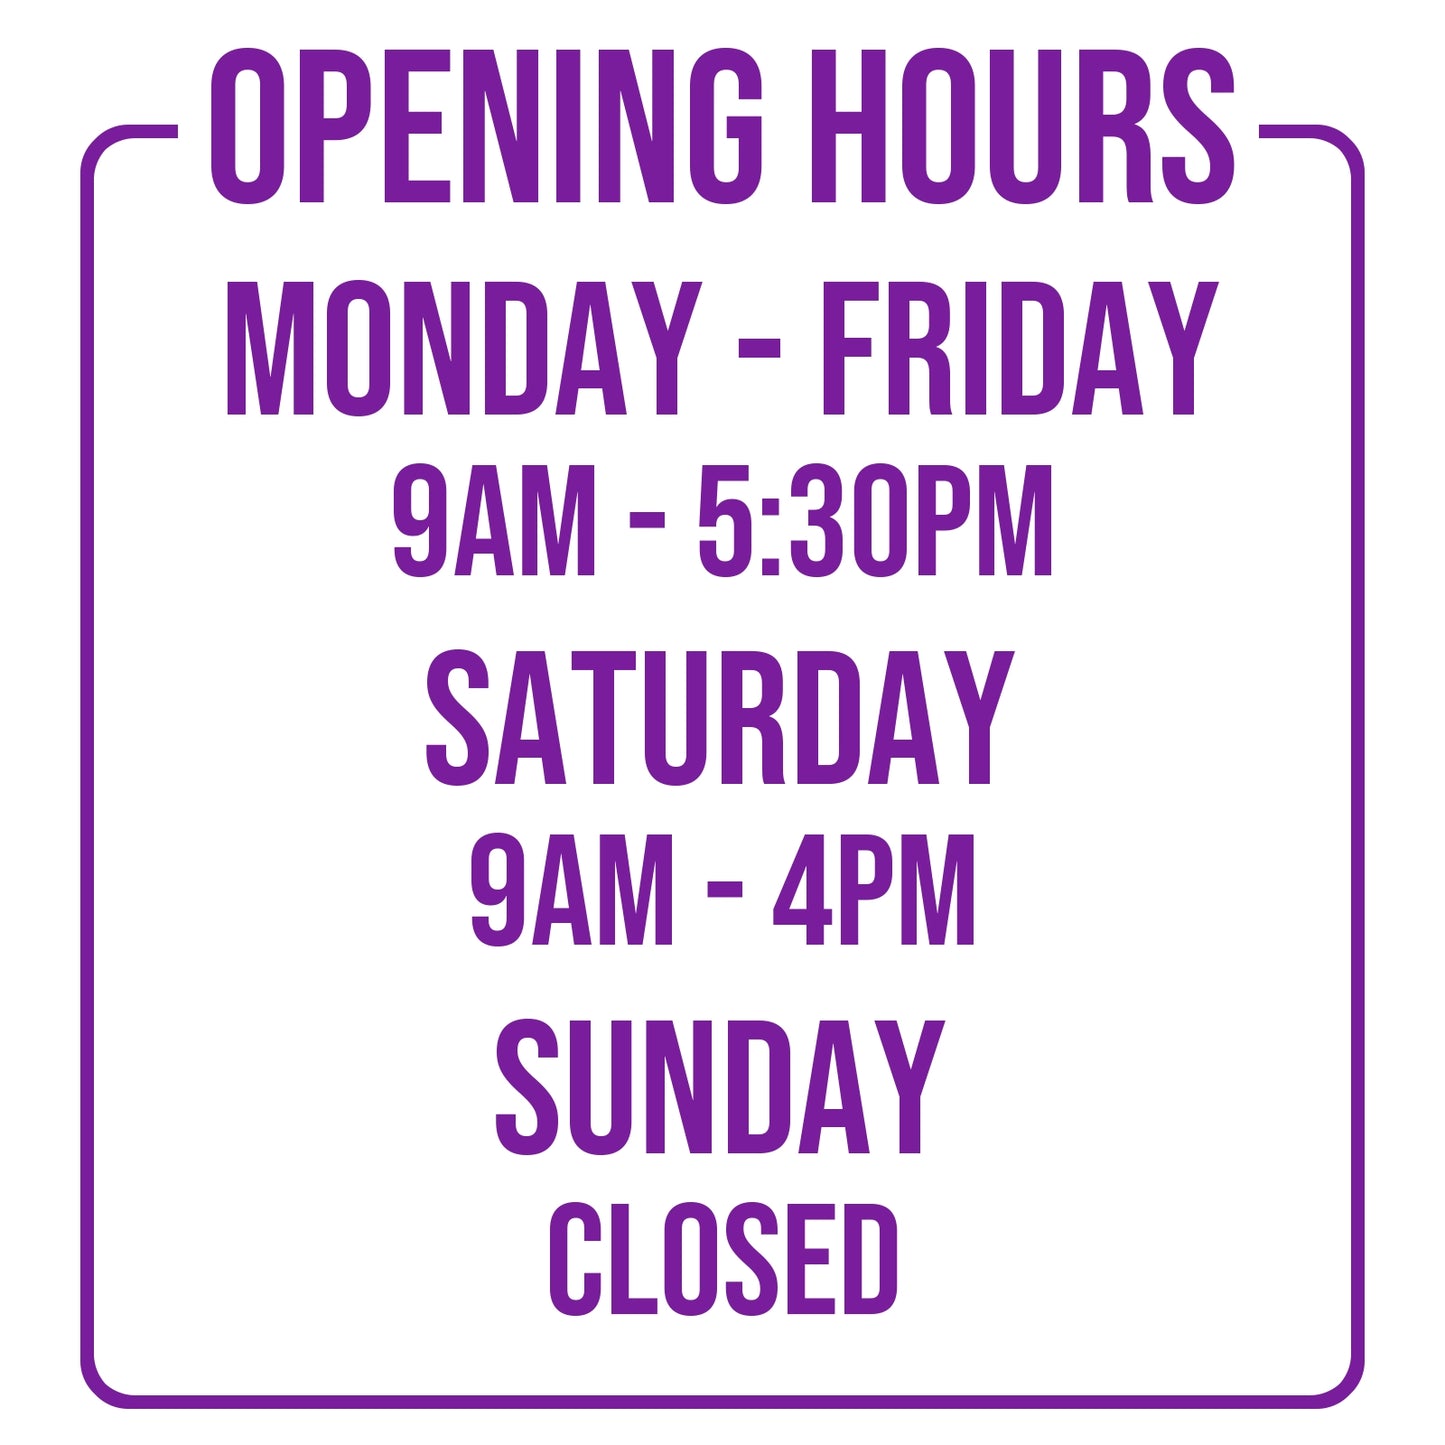 Opening Times for Shop Business Window in Purple